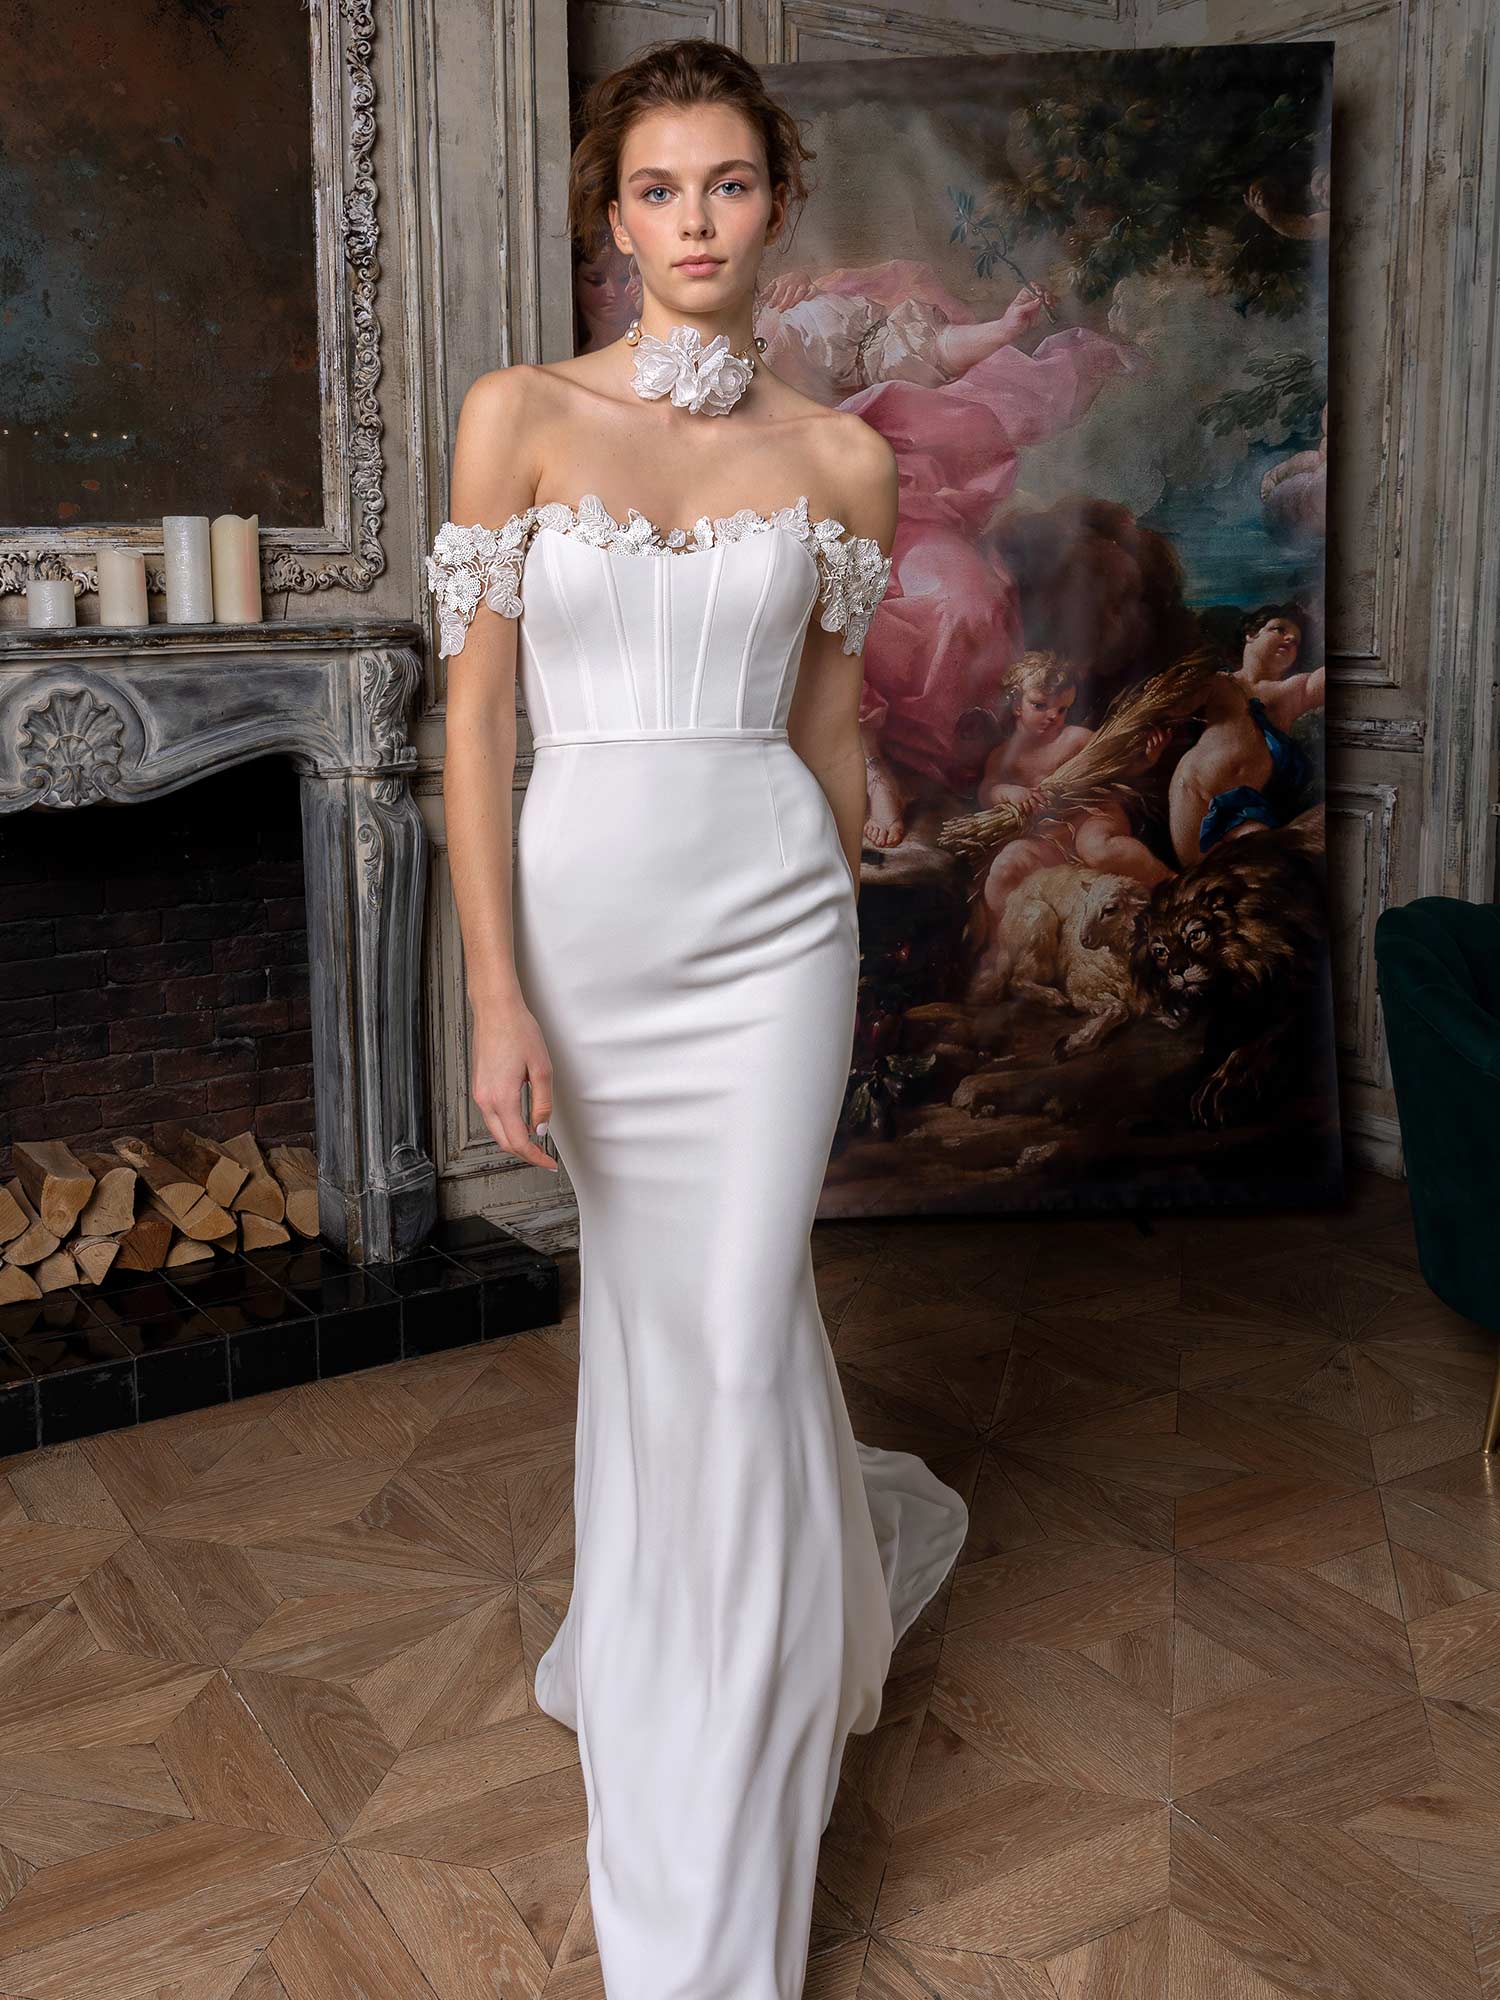 Style #2322L, simple fit and flare wedding gown with an off-the-shoulder sequinned lace decor; available in ivory